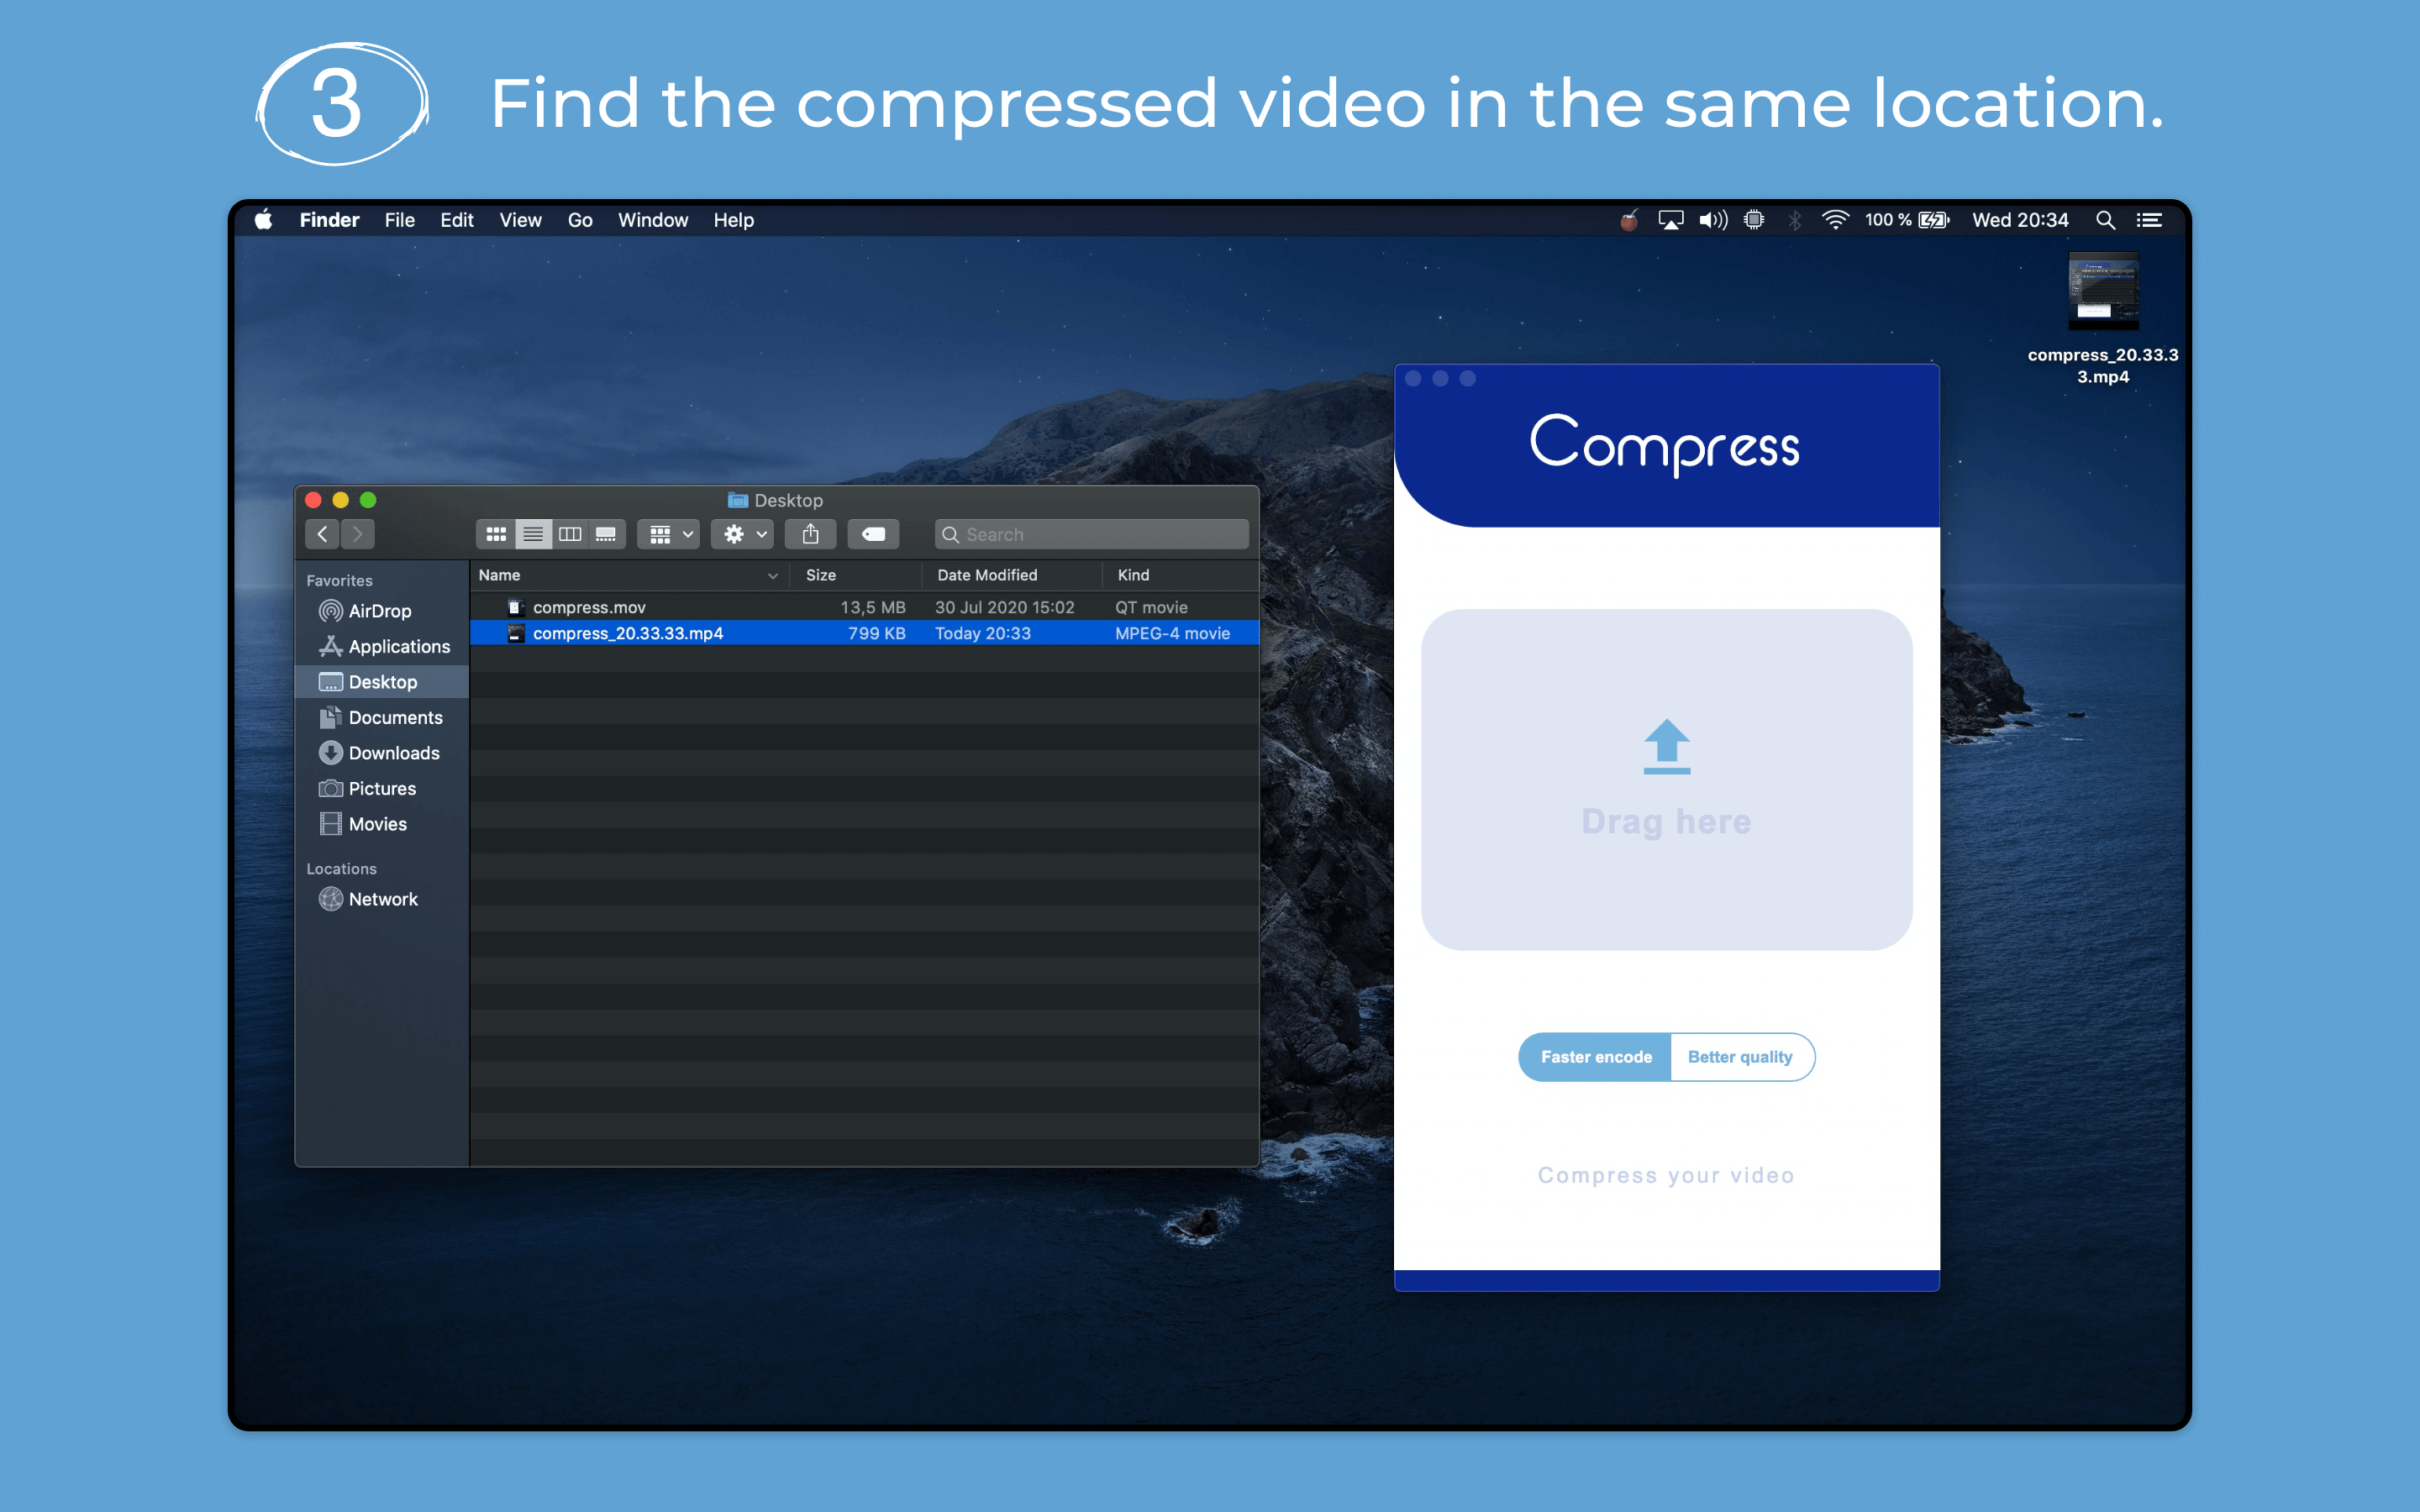 Find the compressed video in the same location.